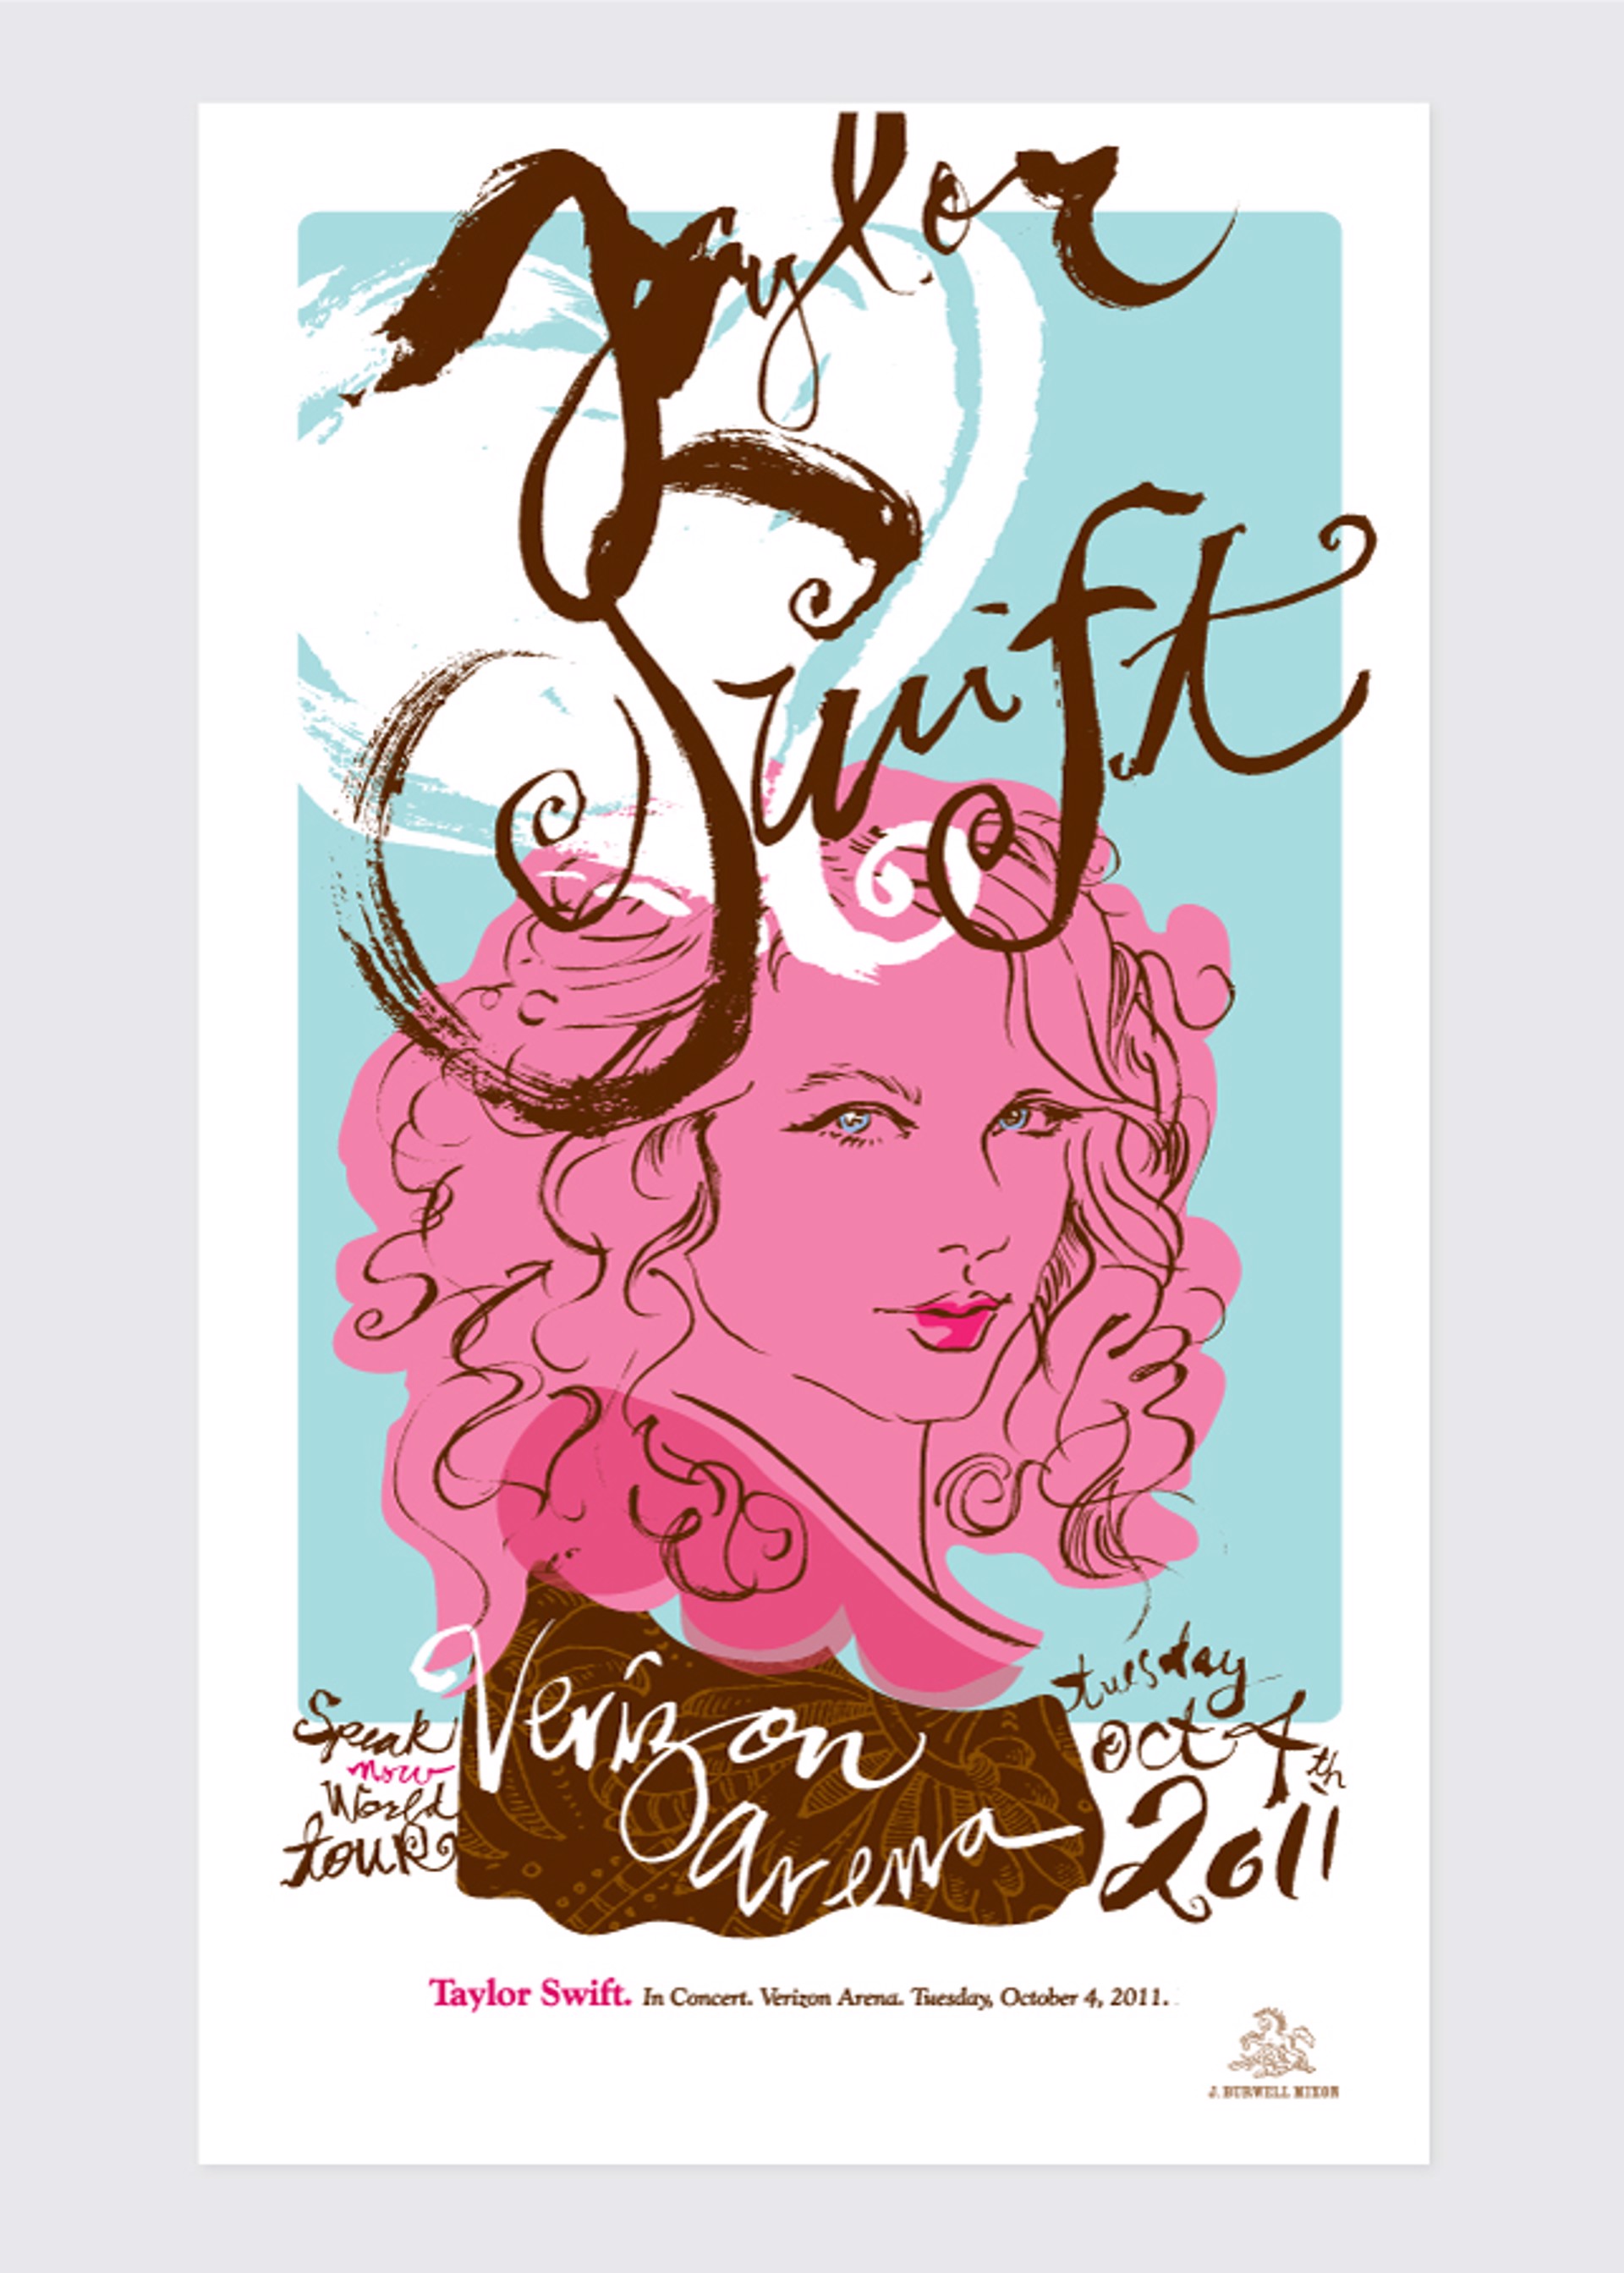 Taylor Swift Concert Poster by Jamie Burwell Mixon